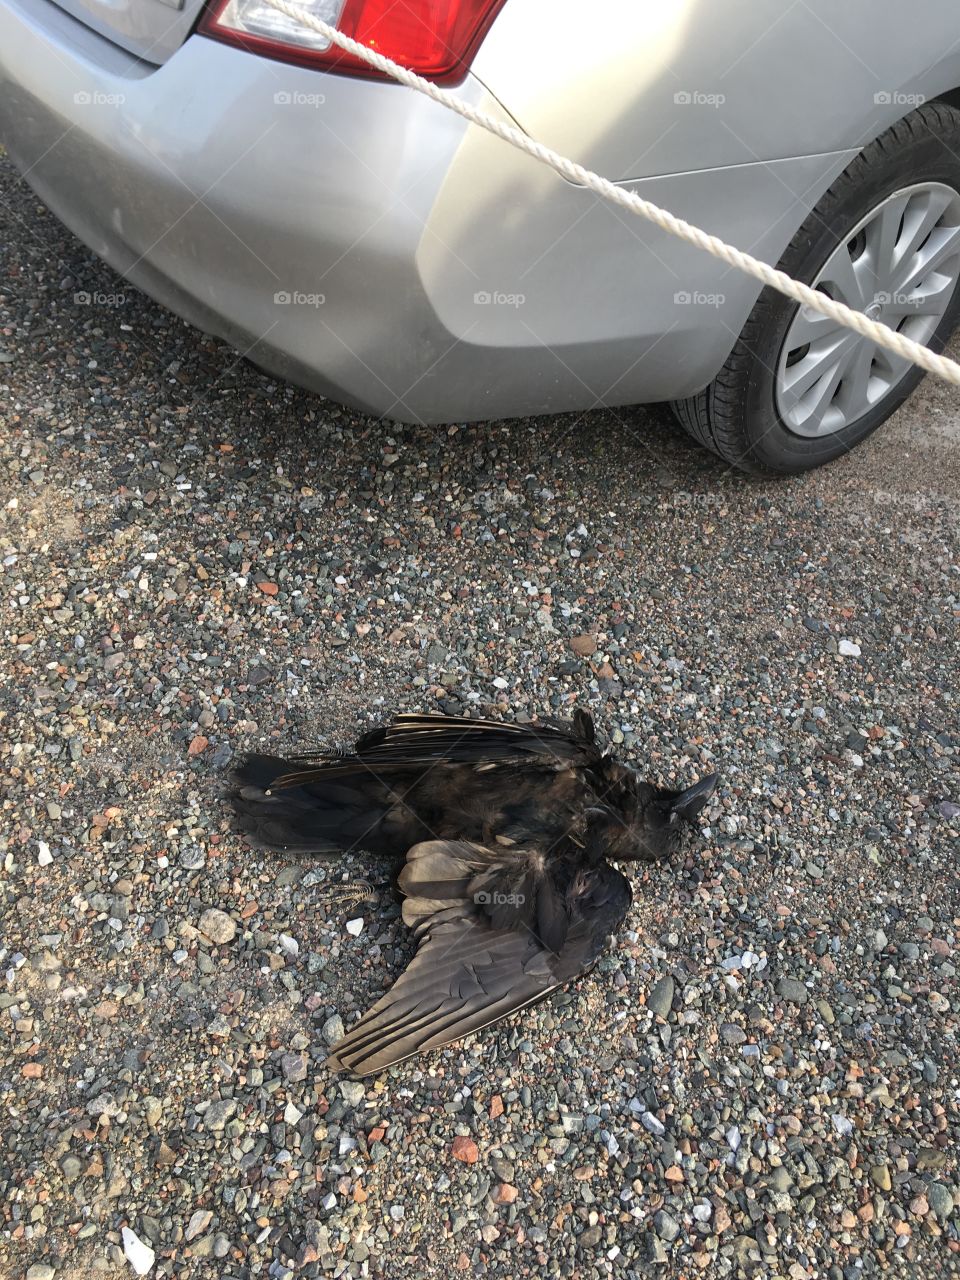 A dead crow, found in my parking spot, on Friday the 13th. An omen? 